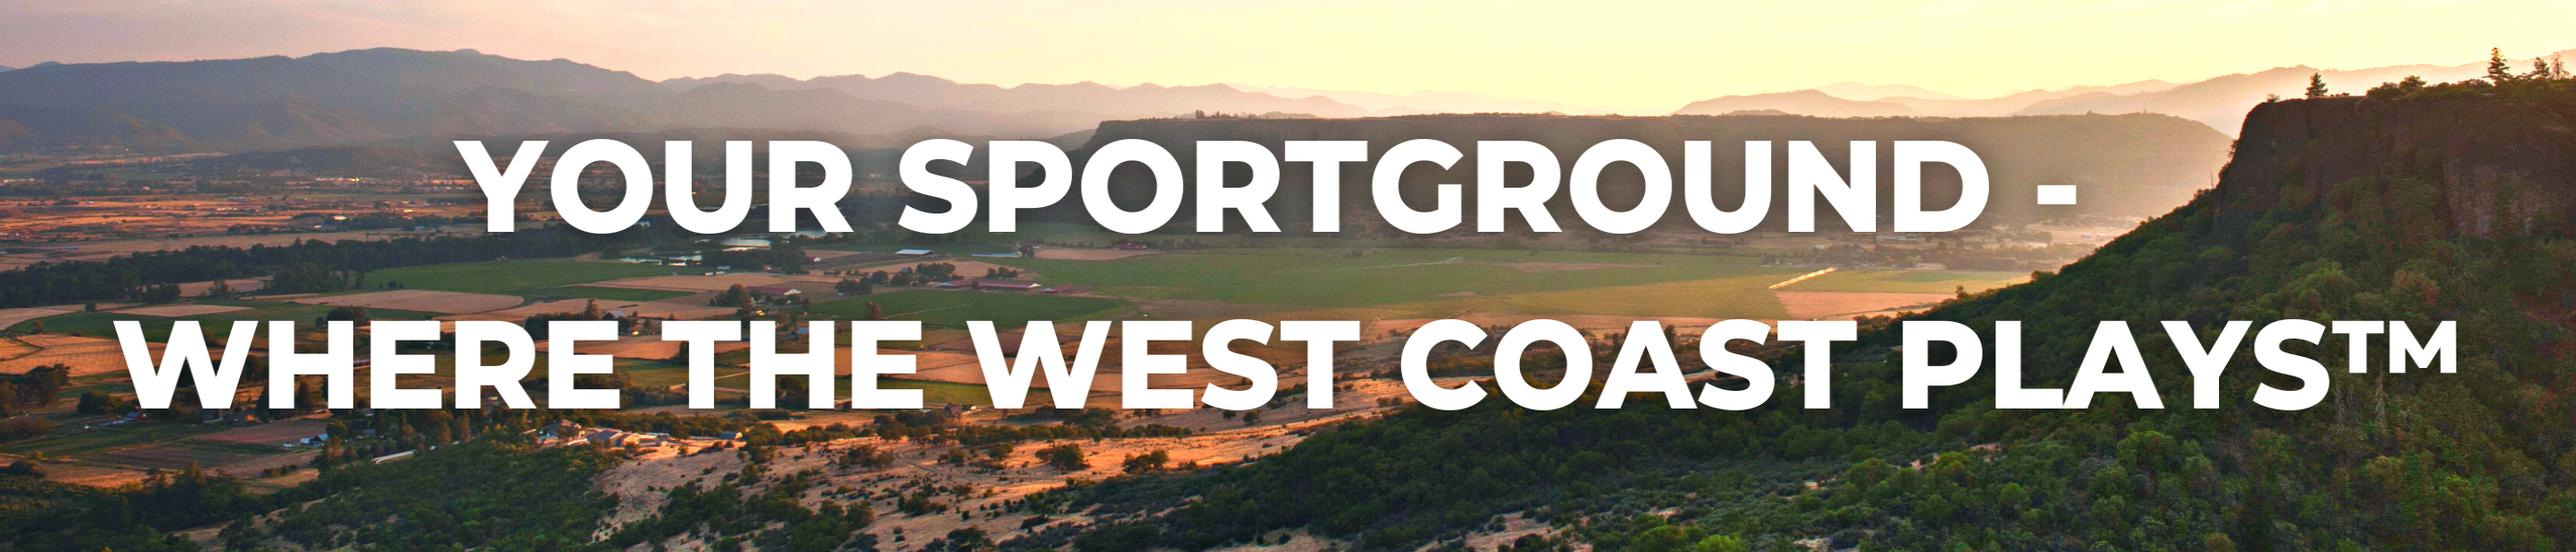 Your Sportground - Where the West Coast Plays™